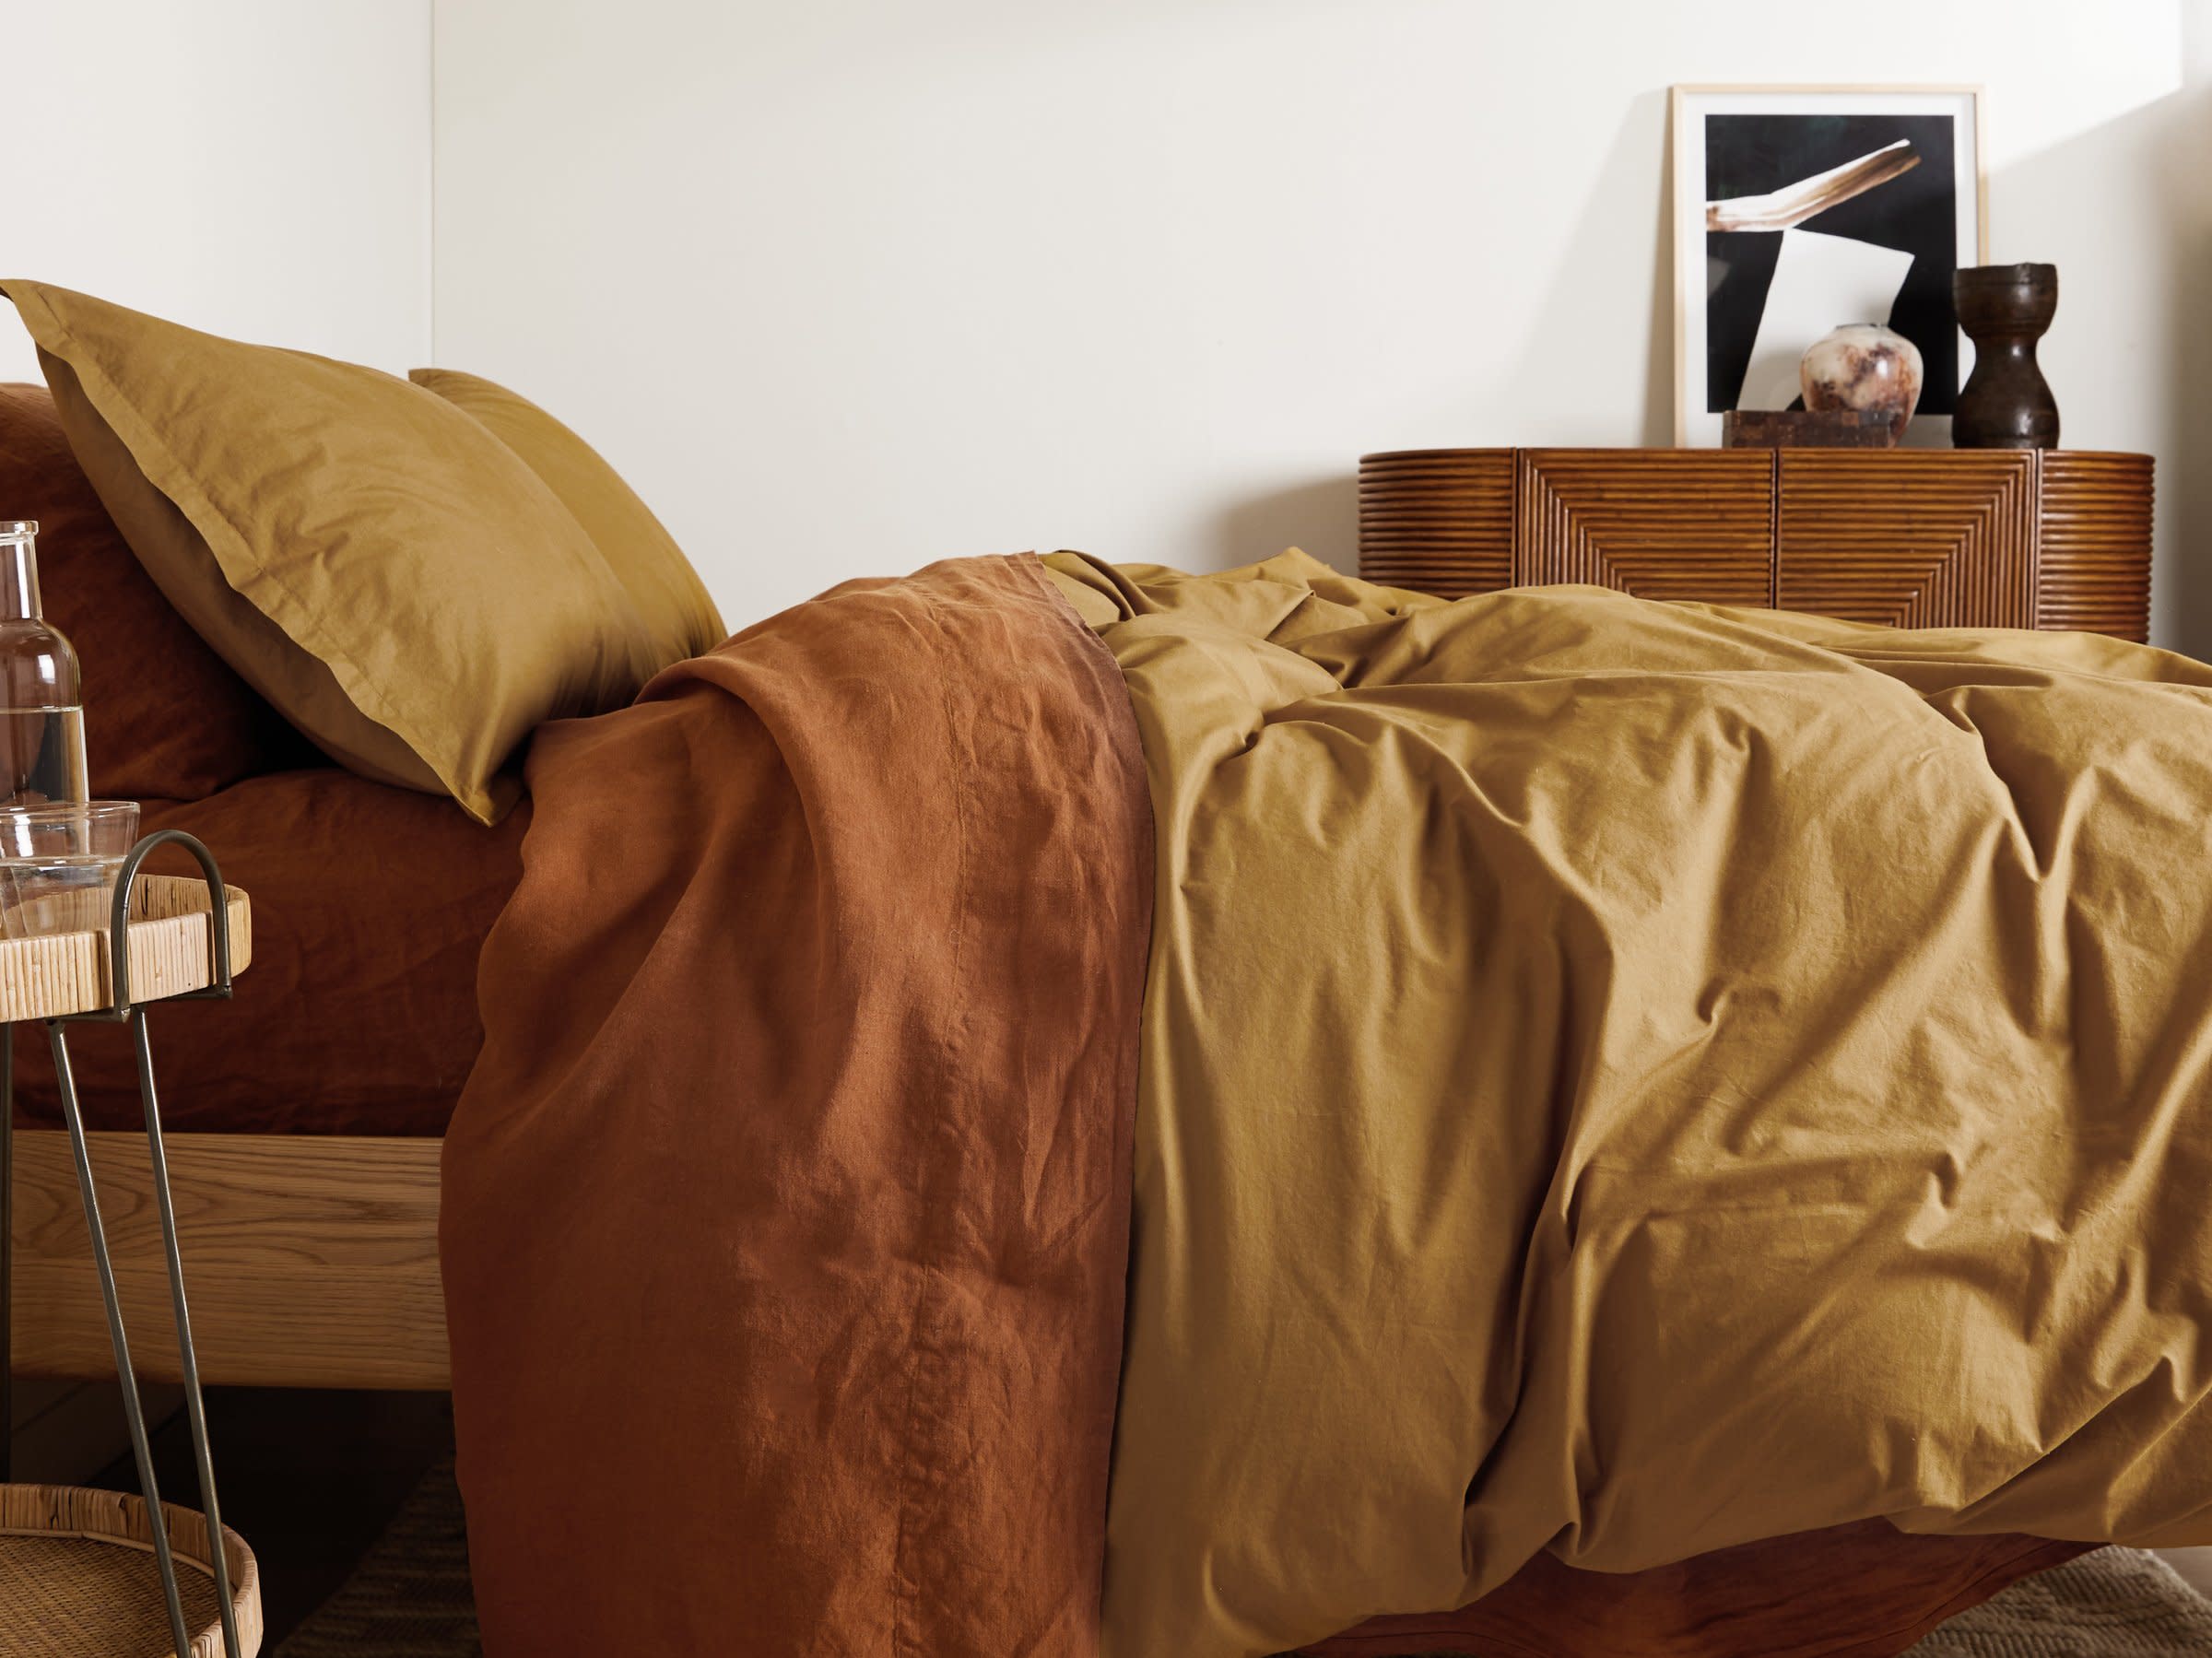 Ochre Brushed Cotton Duvet Cover Set Shown In A Room